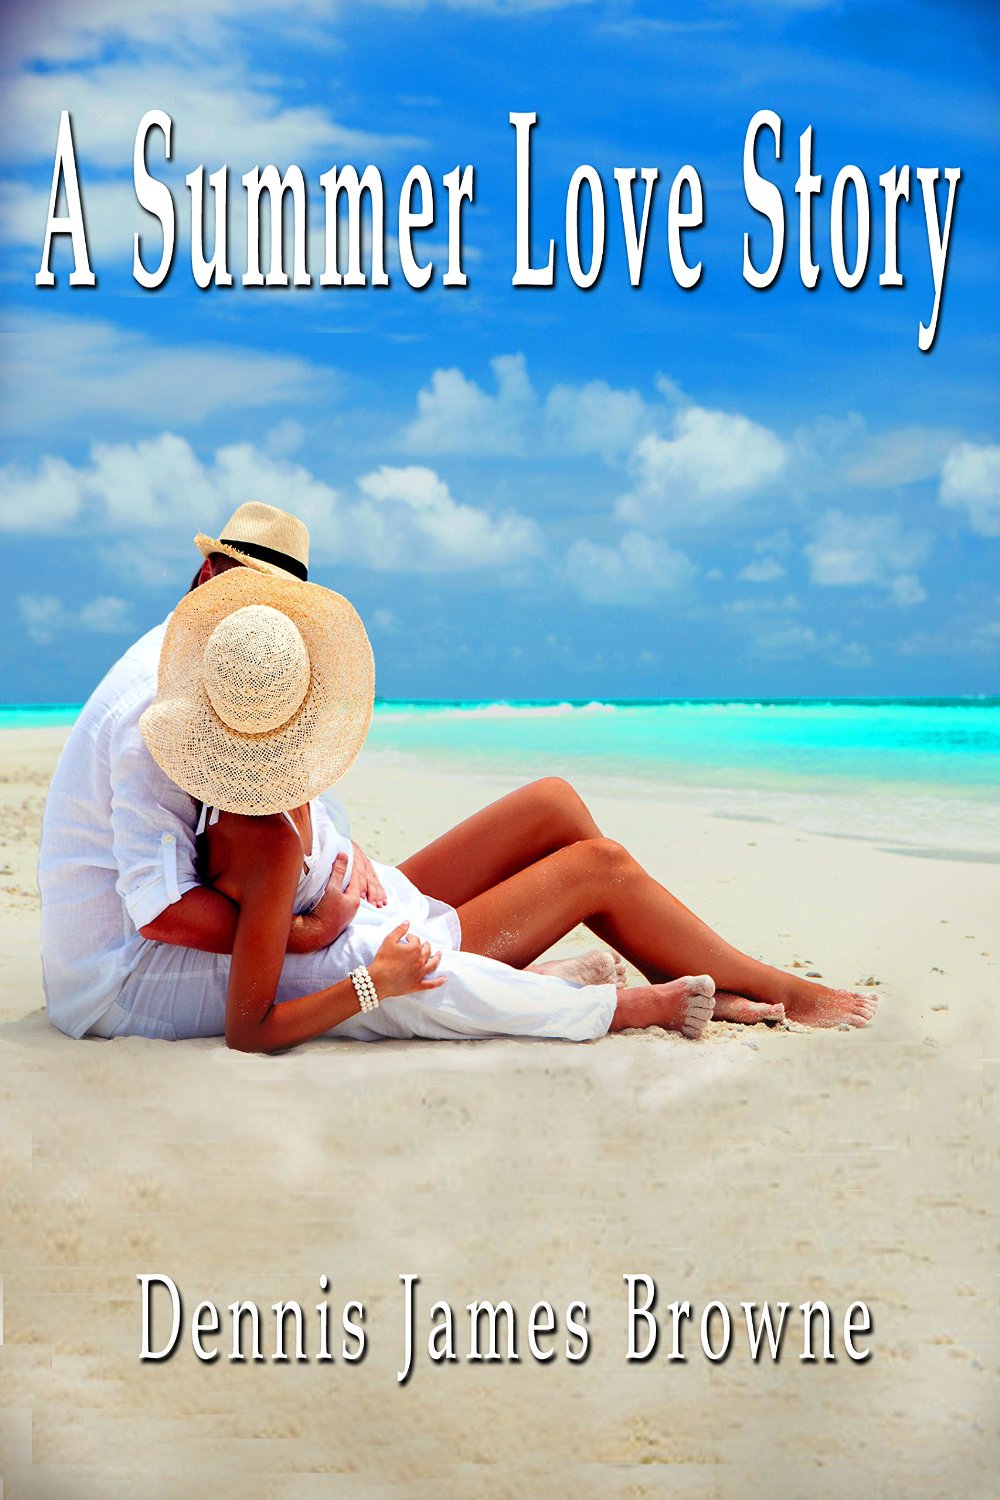 A Summer Love Story by Dennis Browne